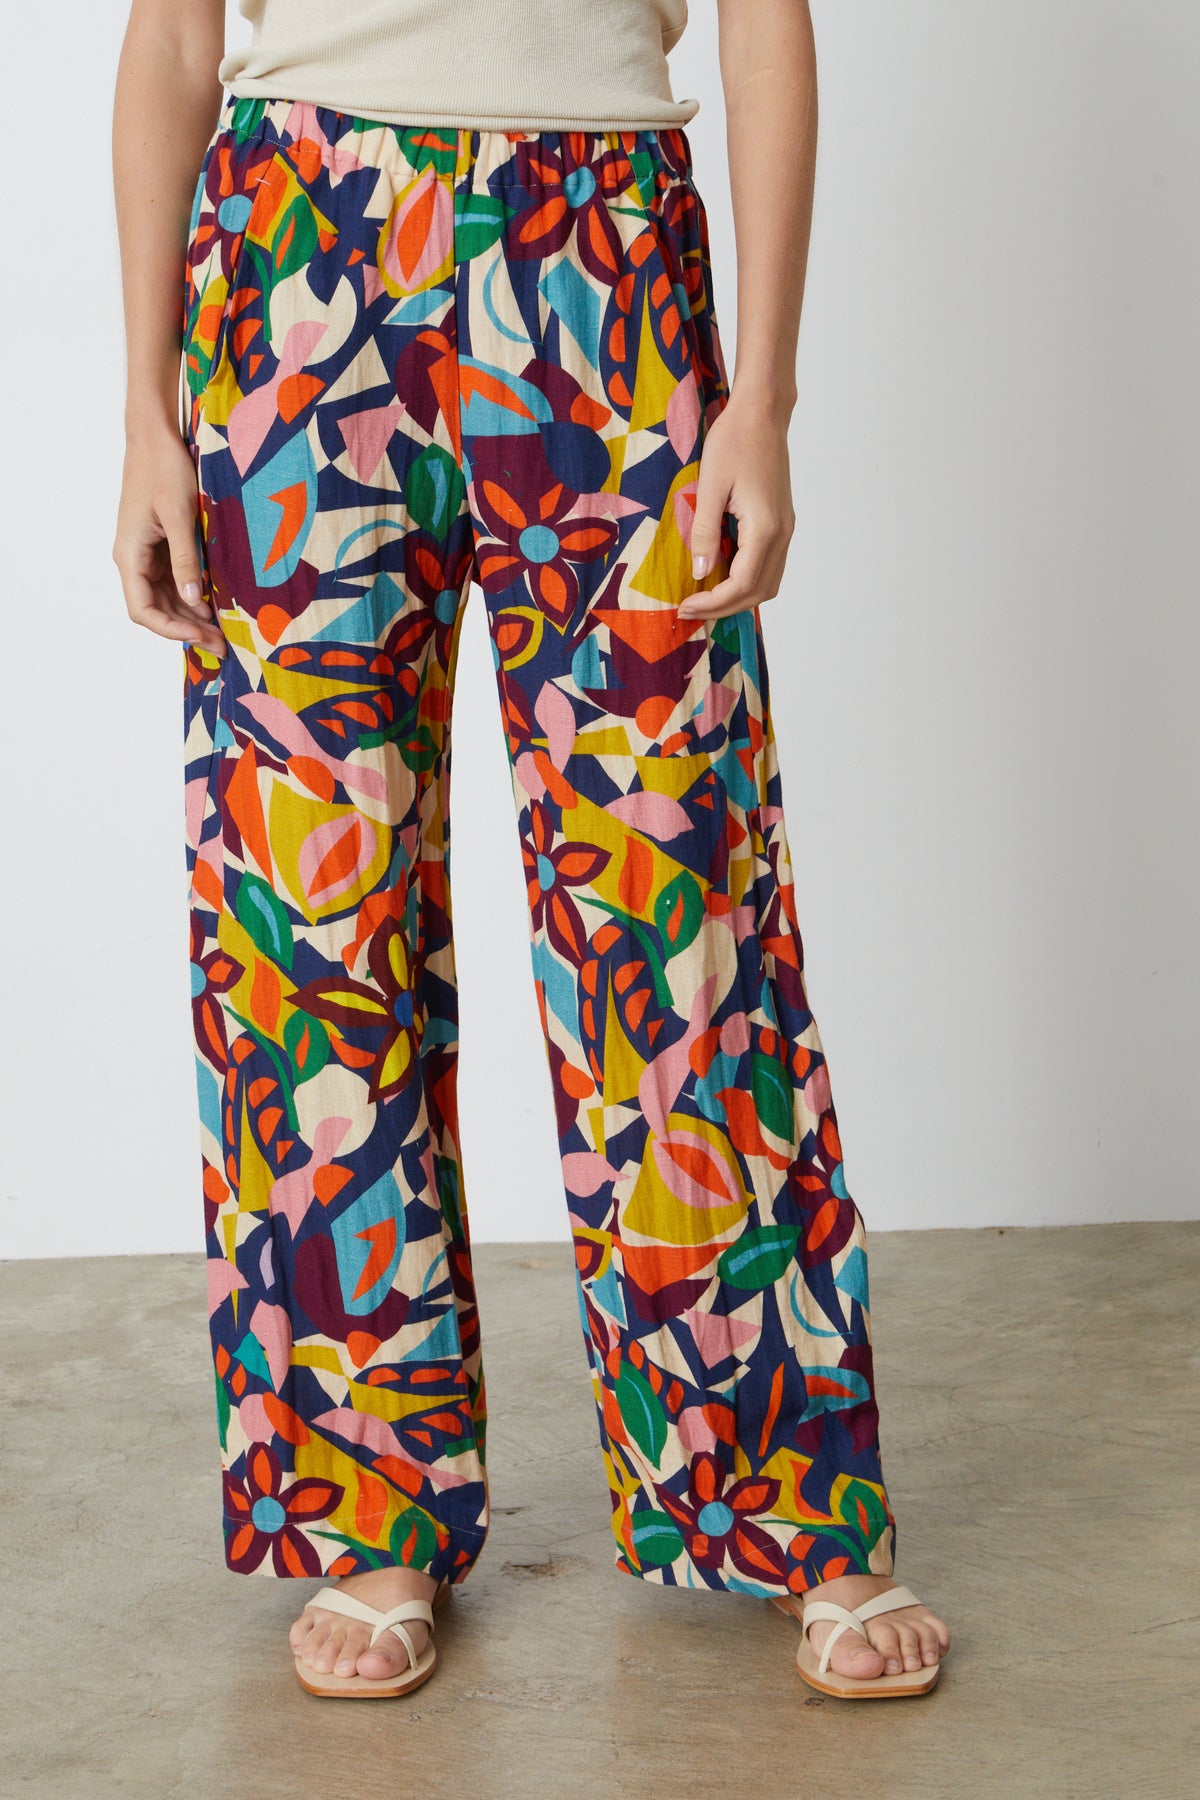 A woman wearing a Velvet by Graham & Spencer BETHANY PRINTED LINEN PANT.-26774788145345